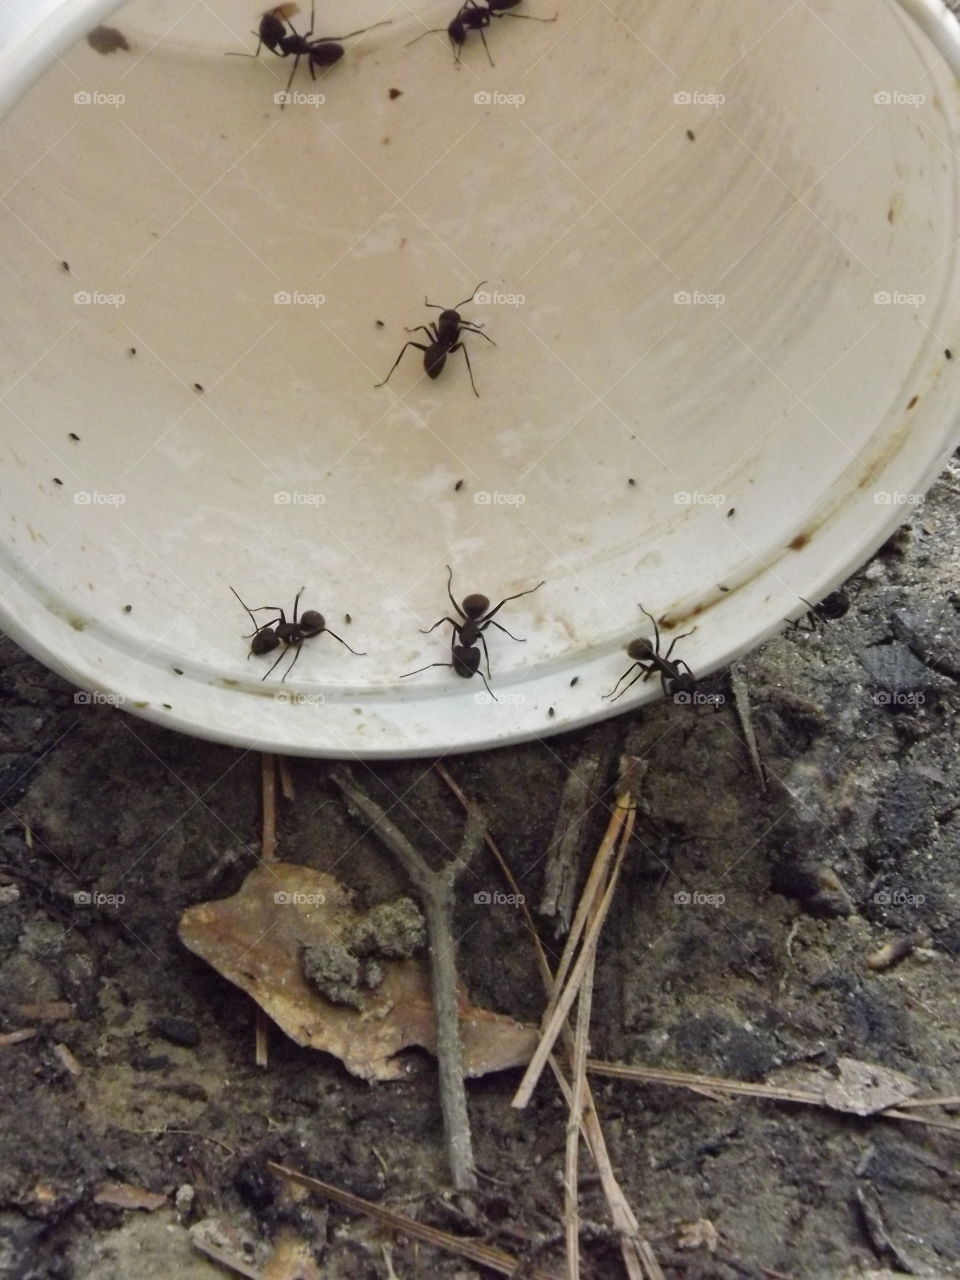 ants searching for easy food